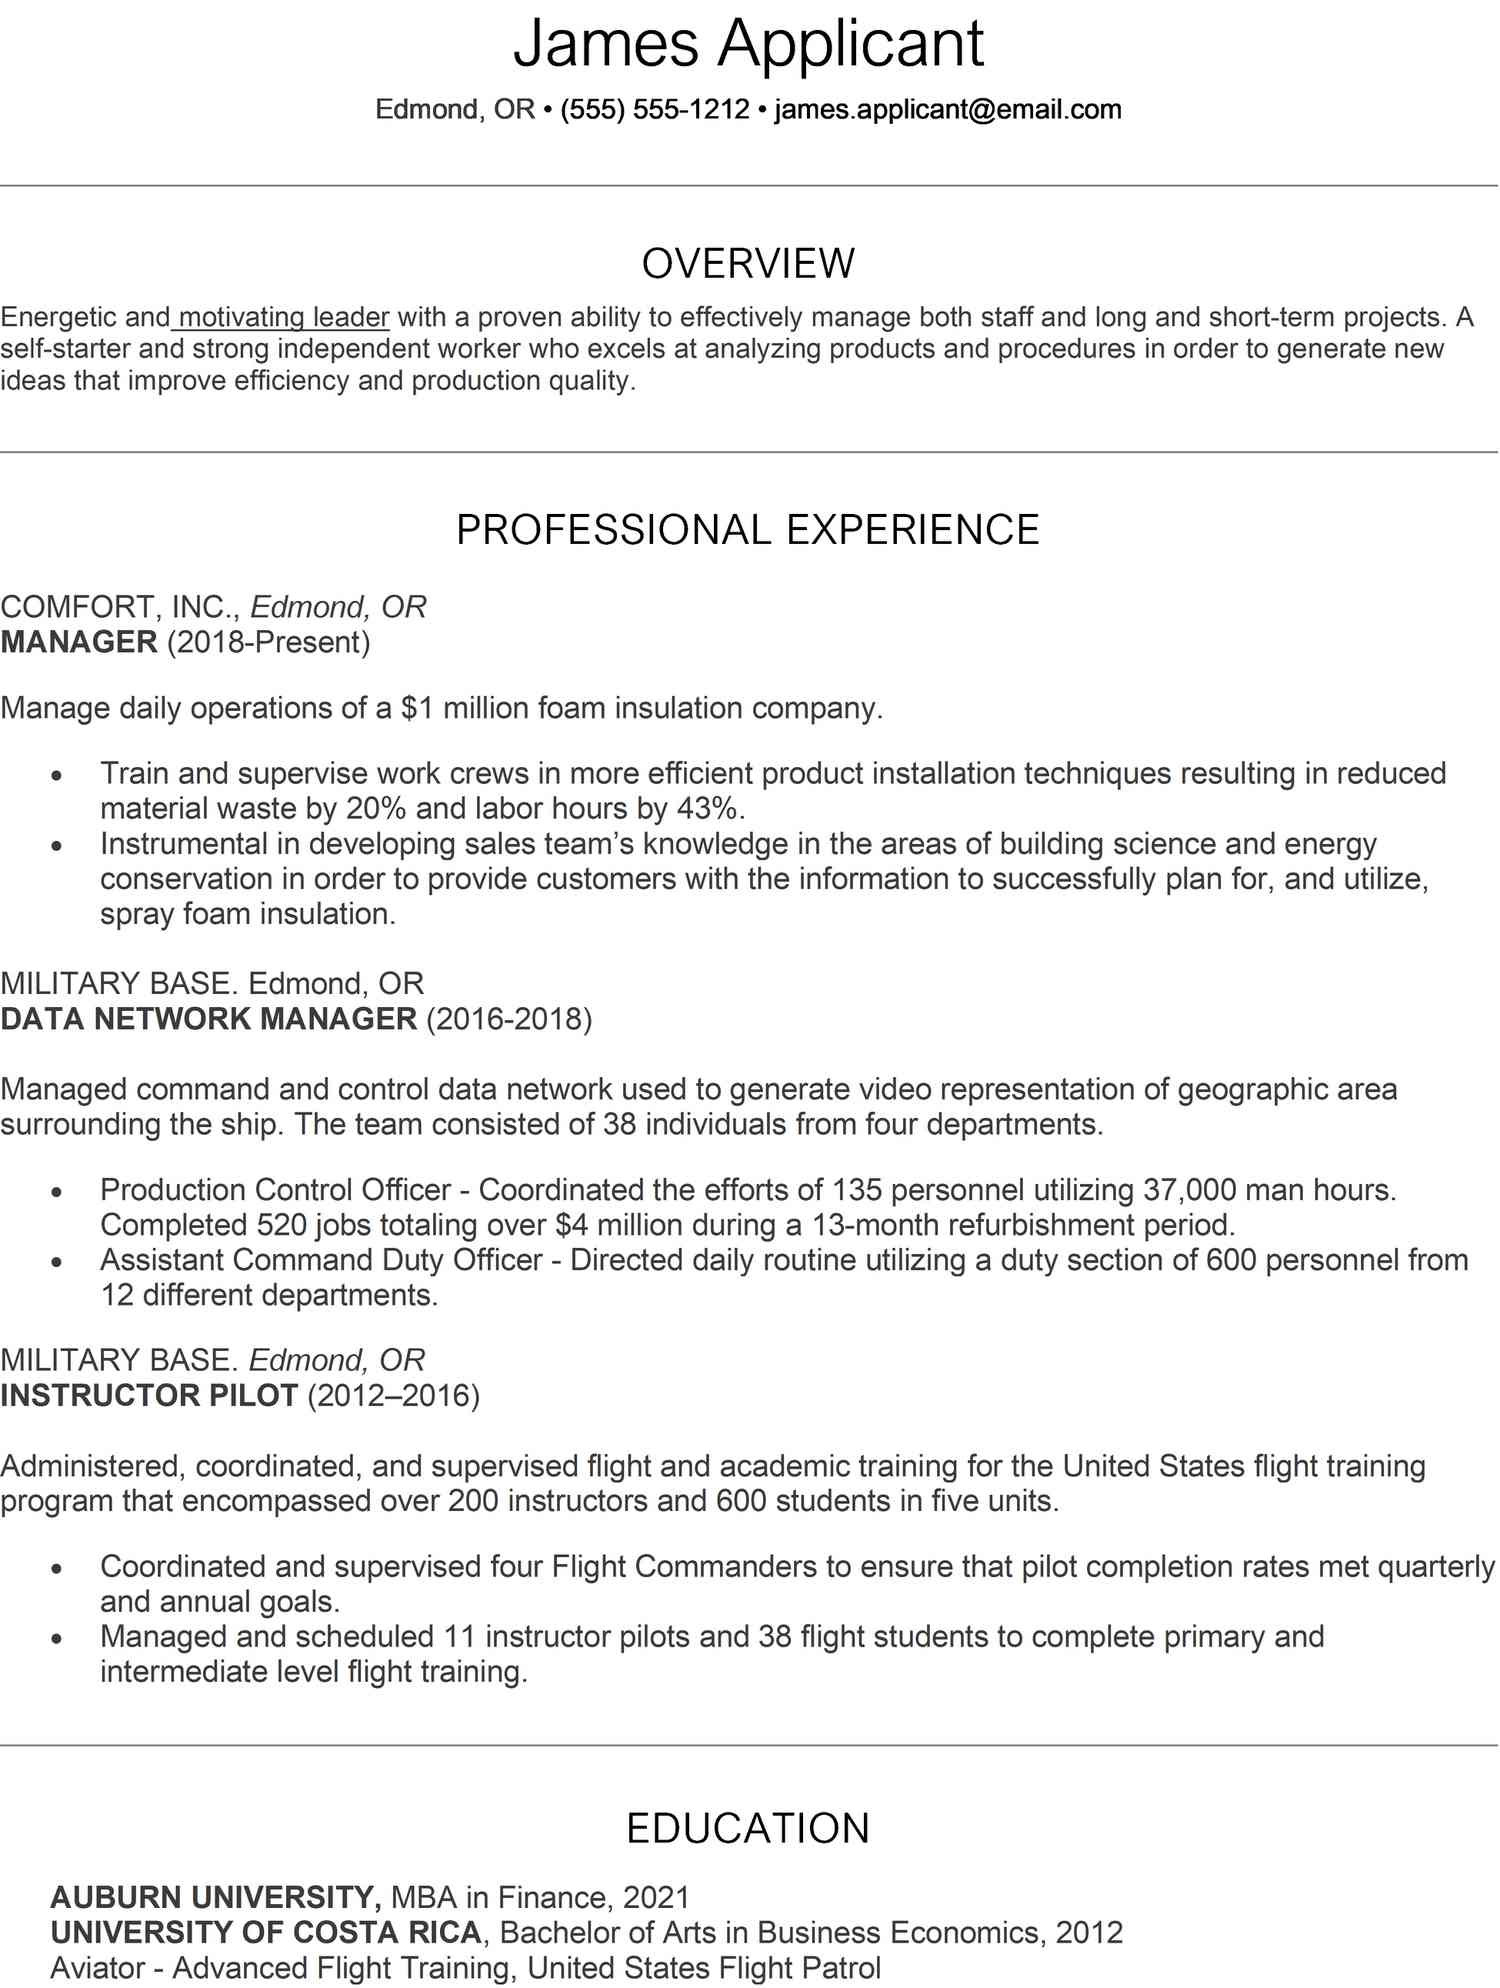 Chronological Resume Sample for College Students Chronological Resume Example (with Writing Tips)